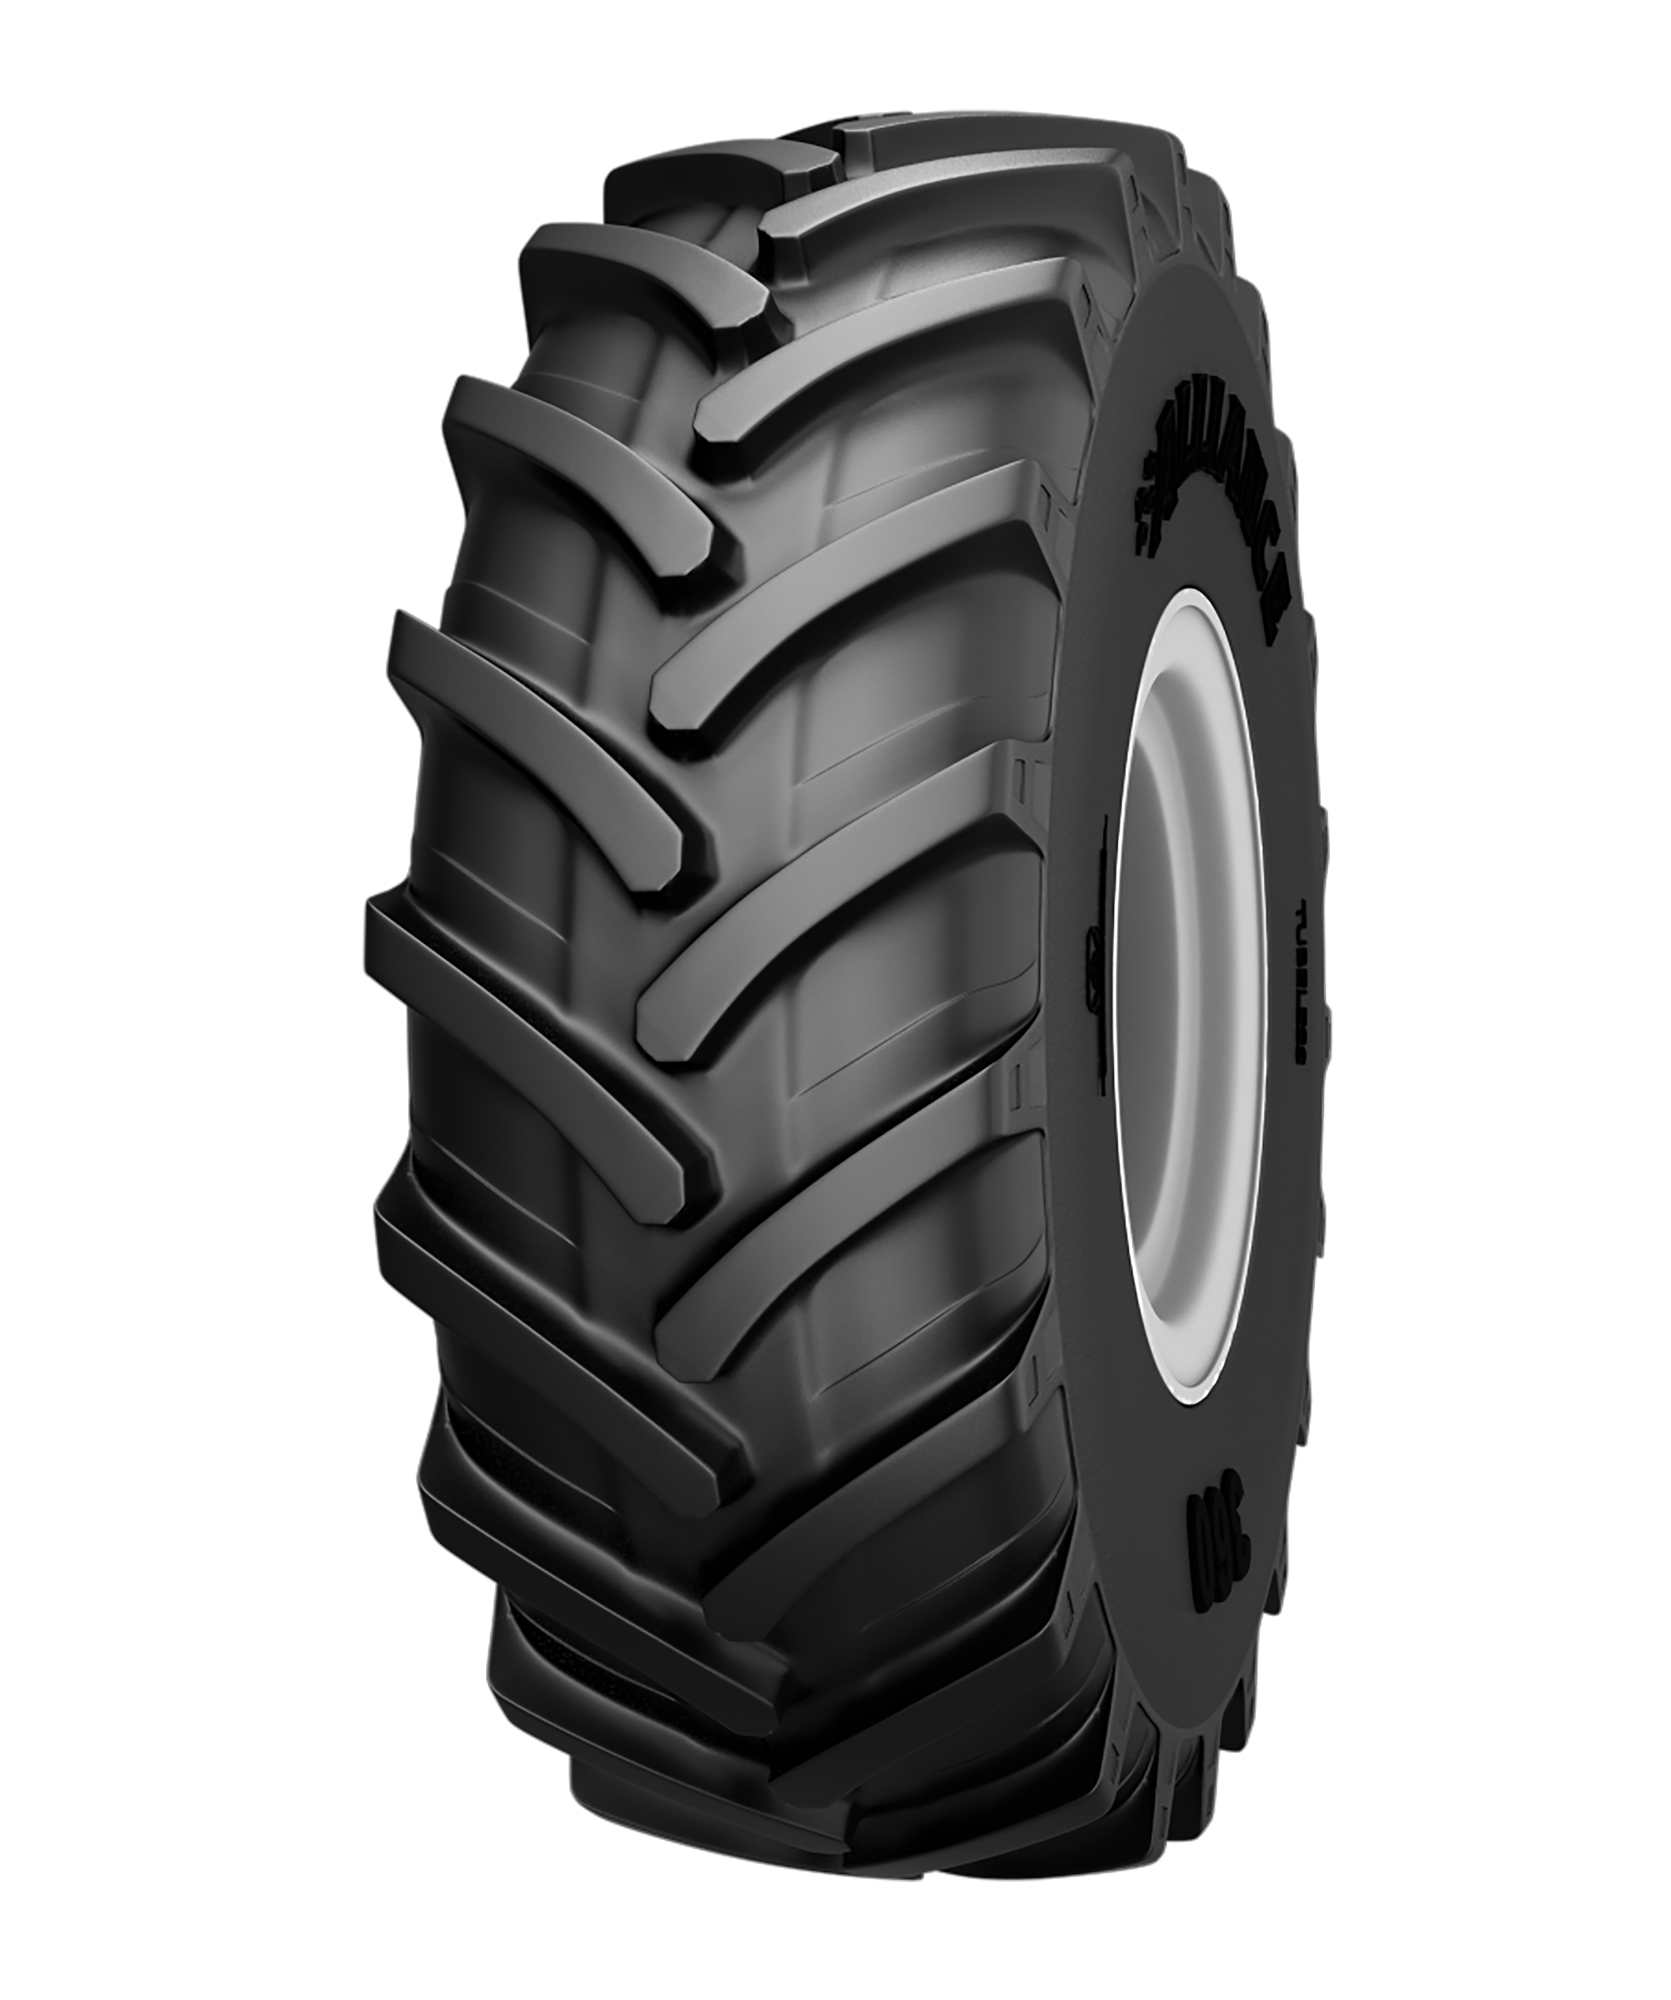   710/70R38  360 168A8/175A2 TL  FORESTRY SB 